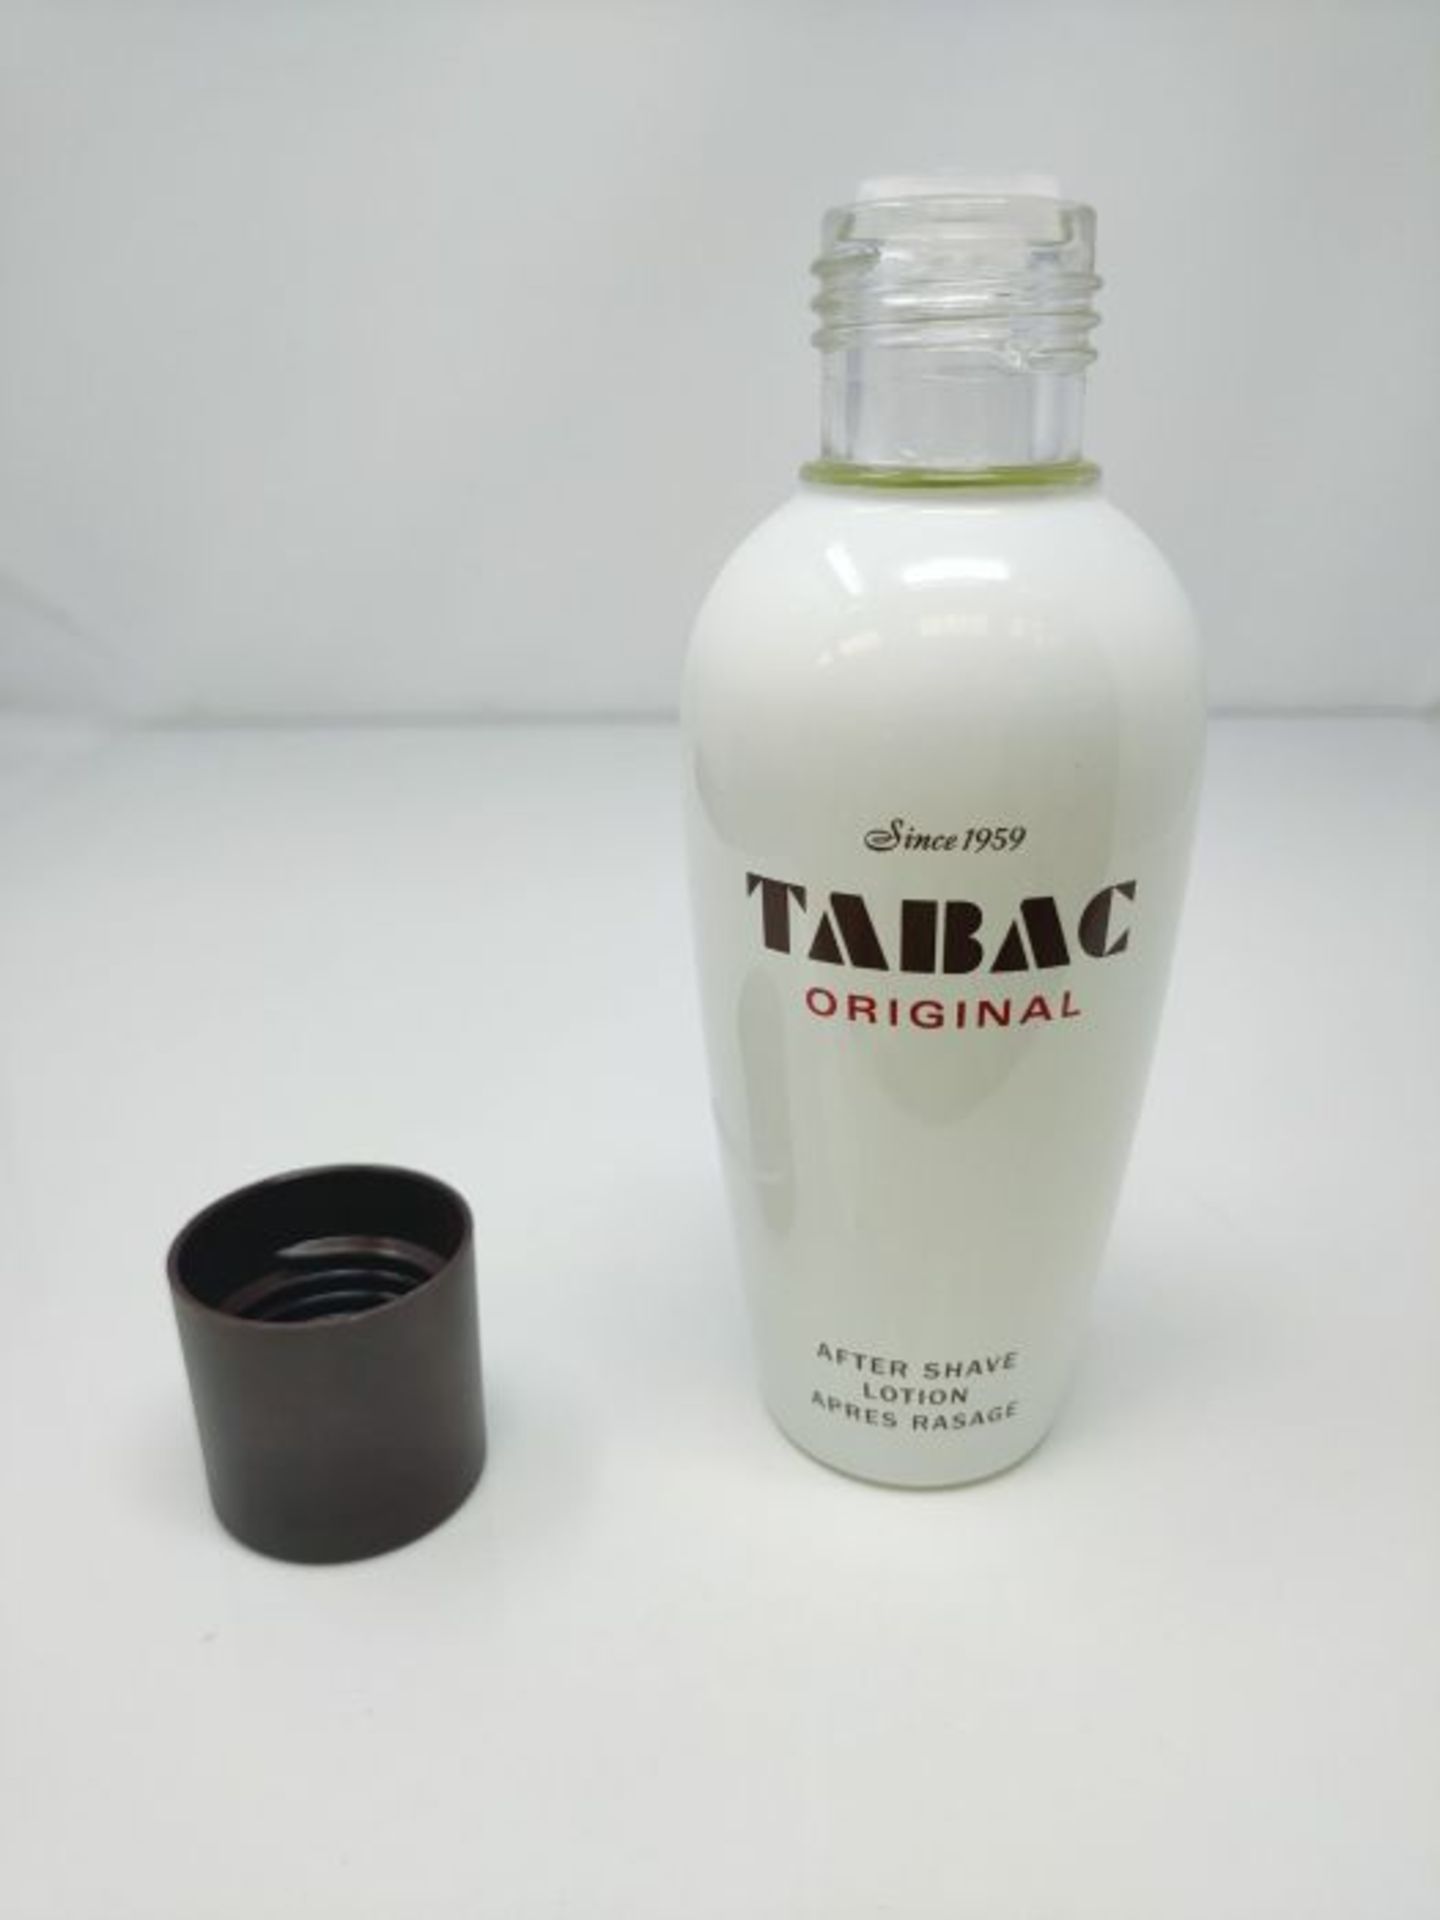 Tabac® Original I After Shave Lotion - Original Since 1959 - invigorates, cools and r - Image 4 of 4